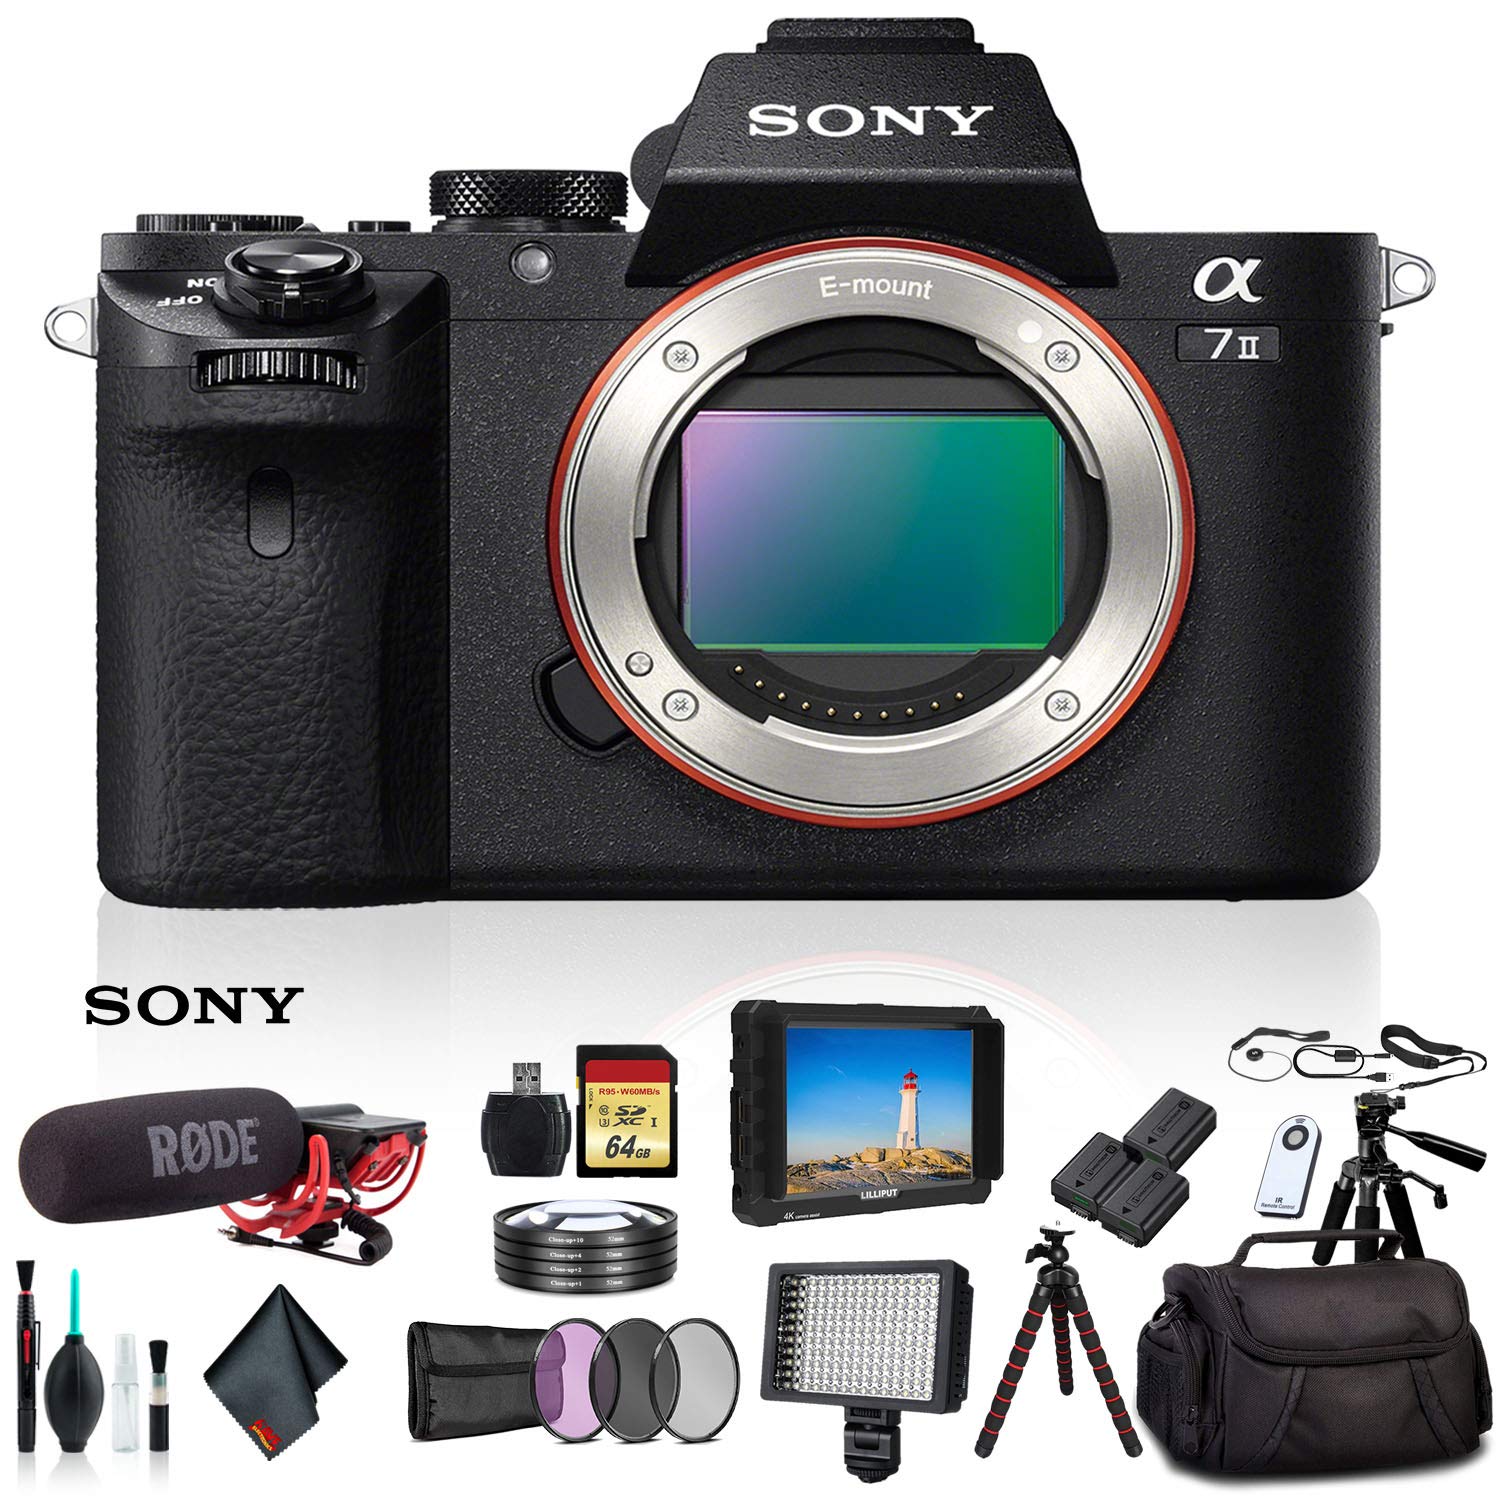 Sony Alpha a7 II Mirrorless Camera ILCE7M2/B With Soft Bag, 2x Extra Batteries, Rode Mic, LED Light, External HD Monitor, 2x 64GB Memory Card, Sling Bag, Card Reader , Plus Essential Accessories